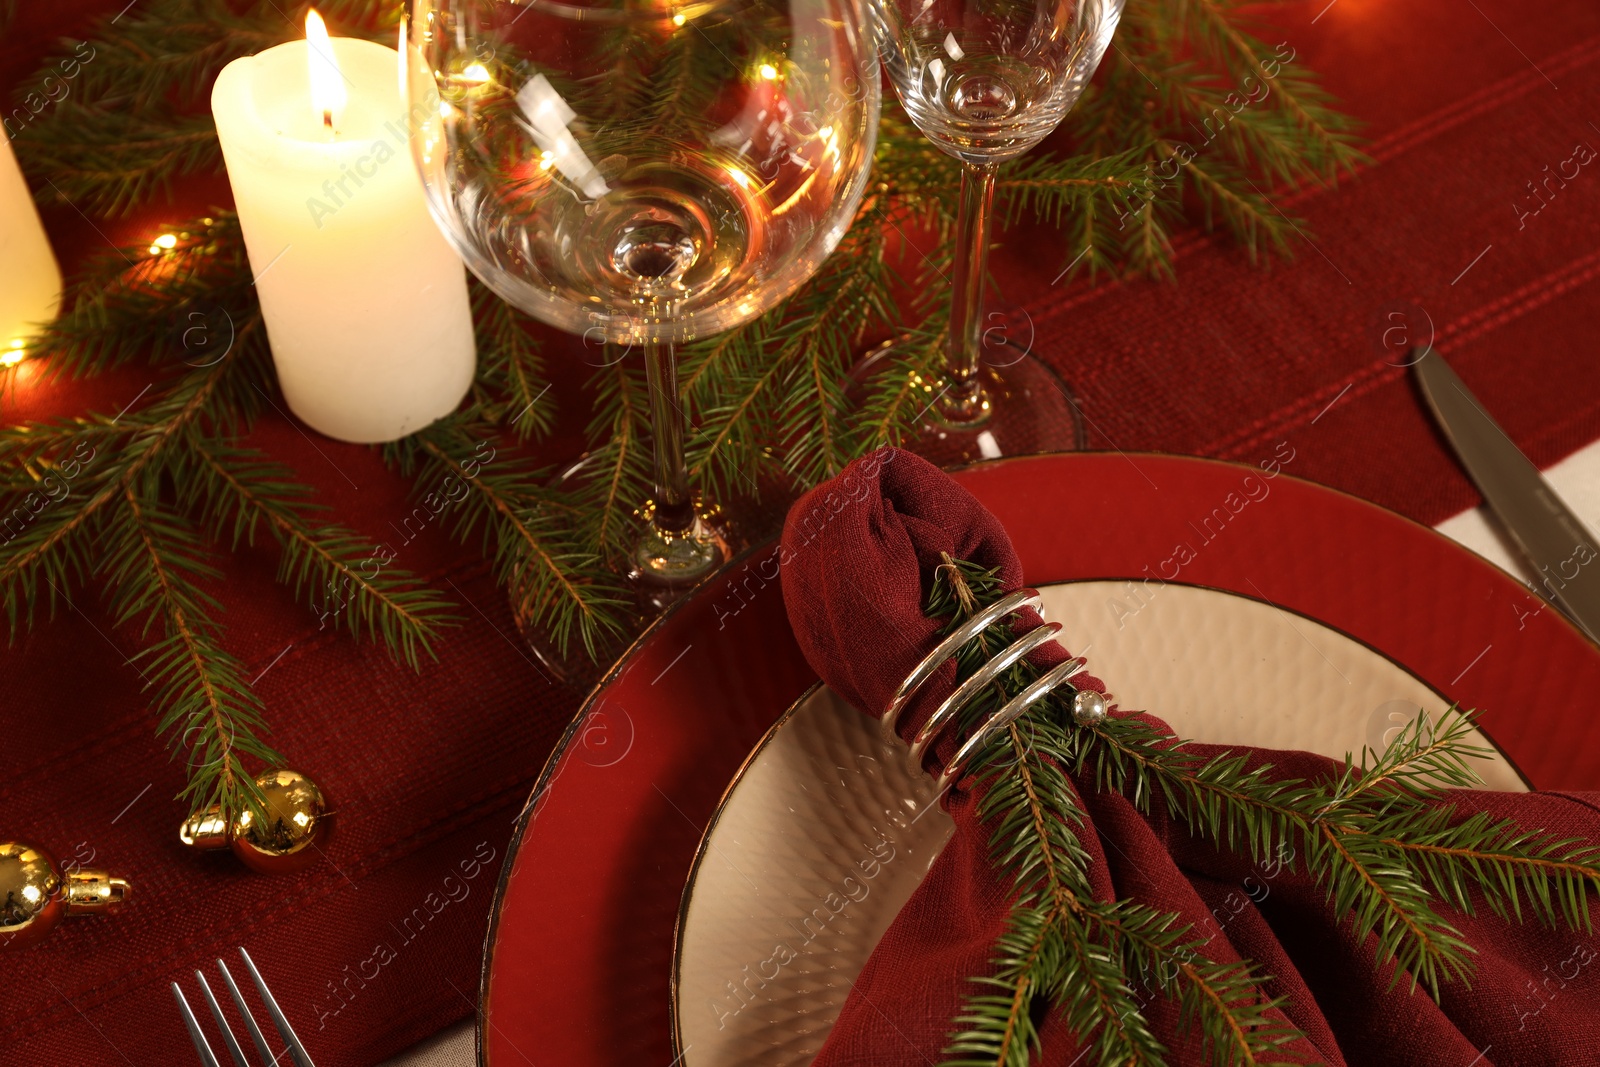 Photo of Christmas place setting with festive decor on table, closeup